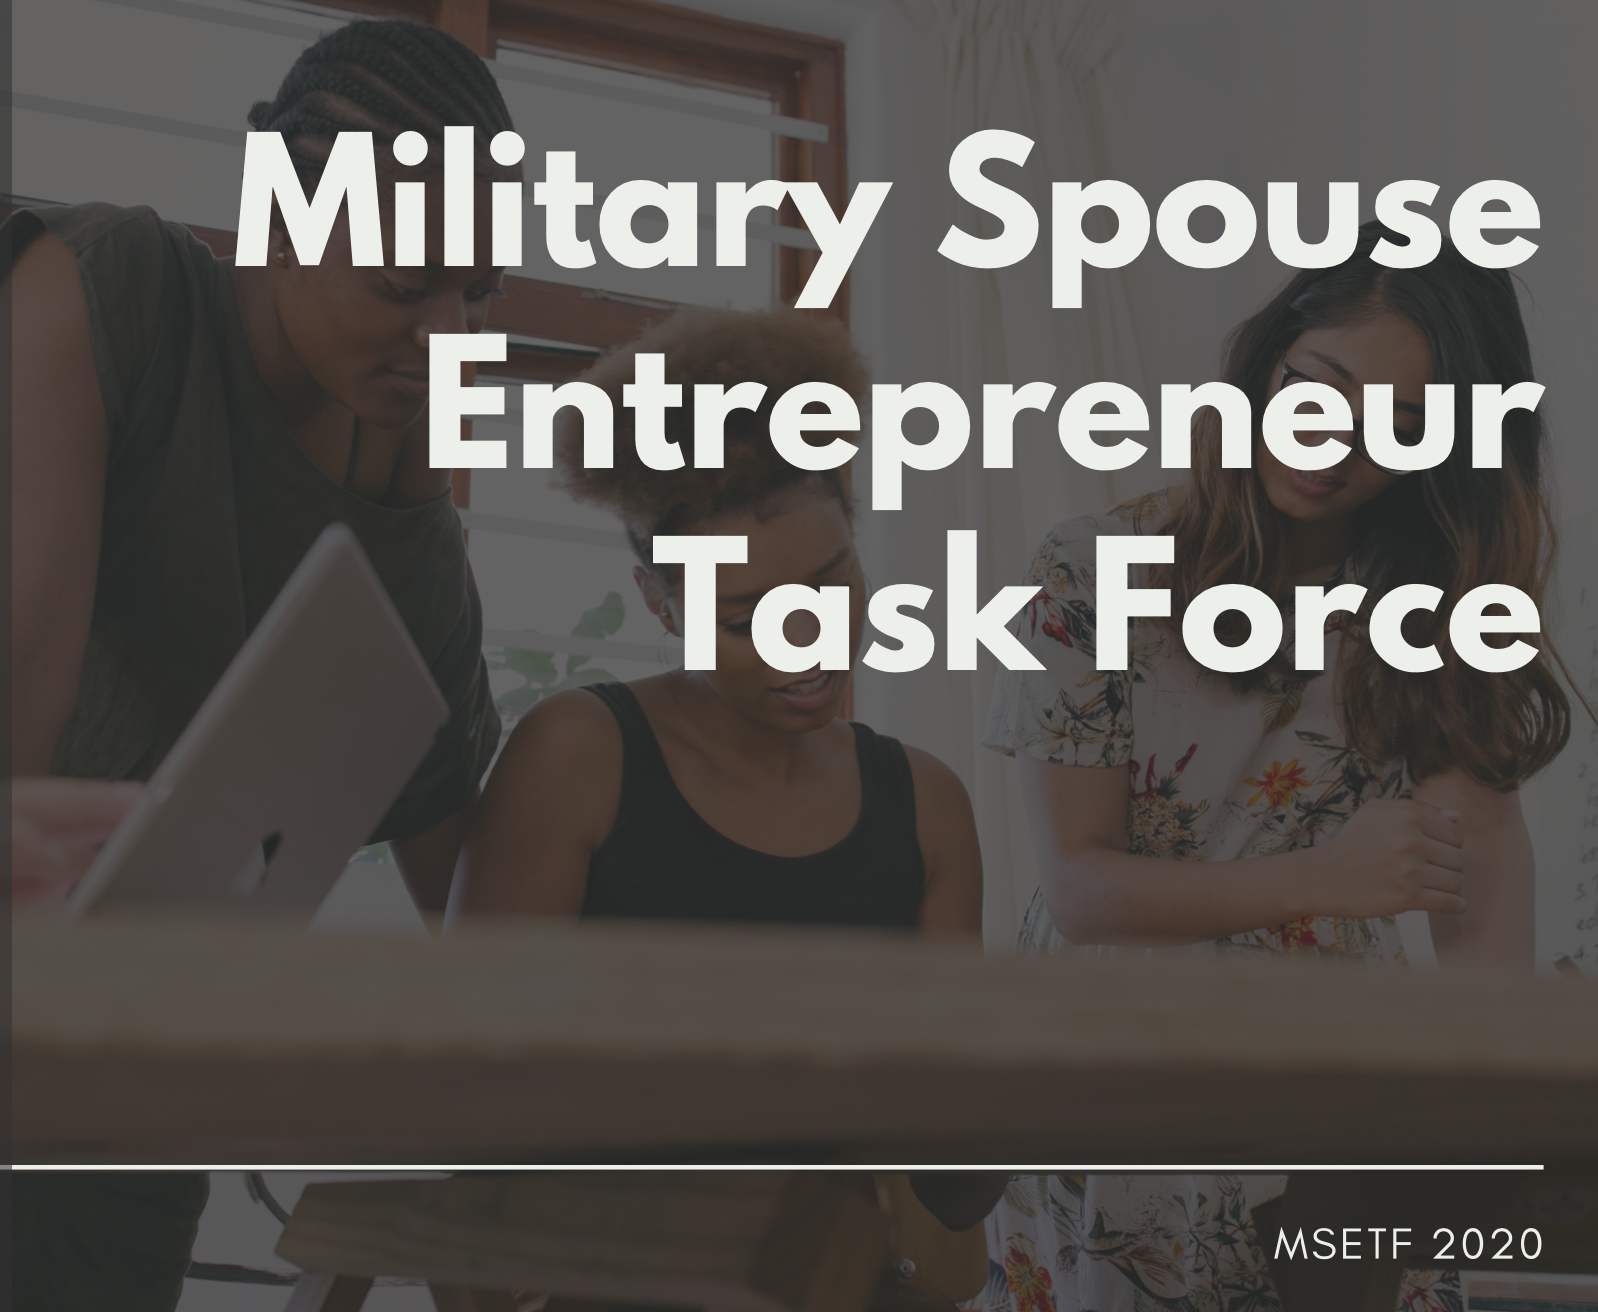 Military Spouse Entrepreneur Task Force About image